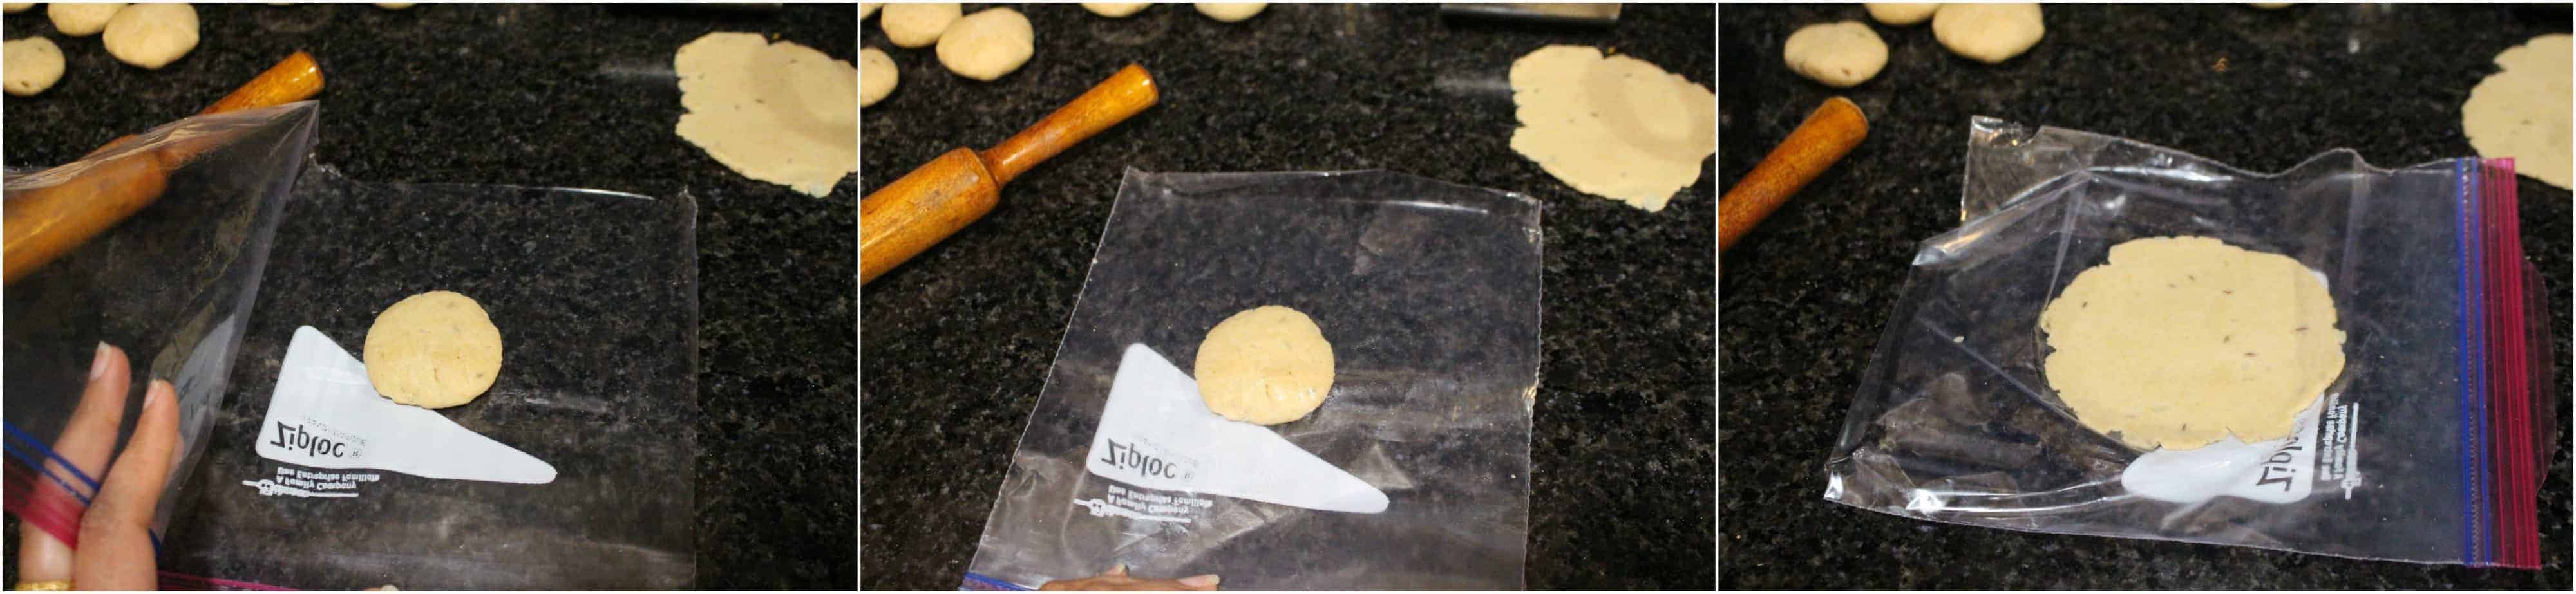 Rolling dough by placing it in the plastic bag to avoid sticking.